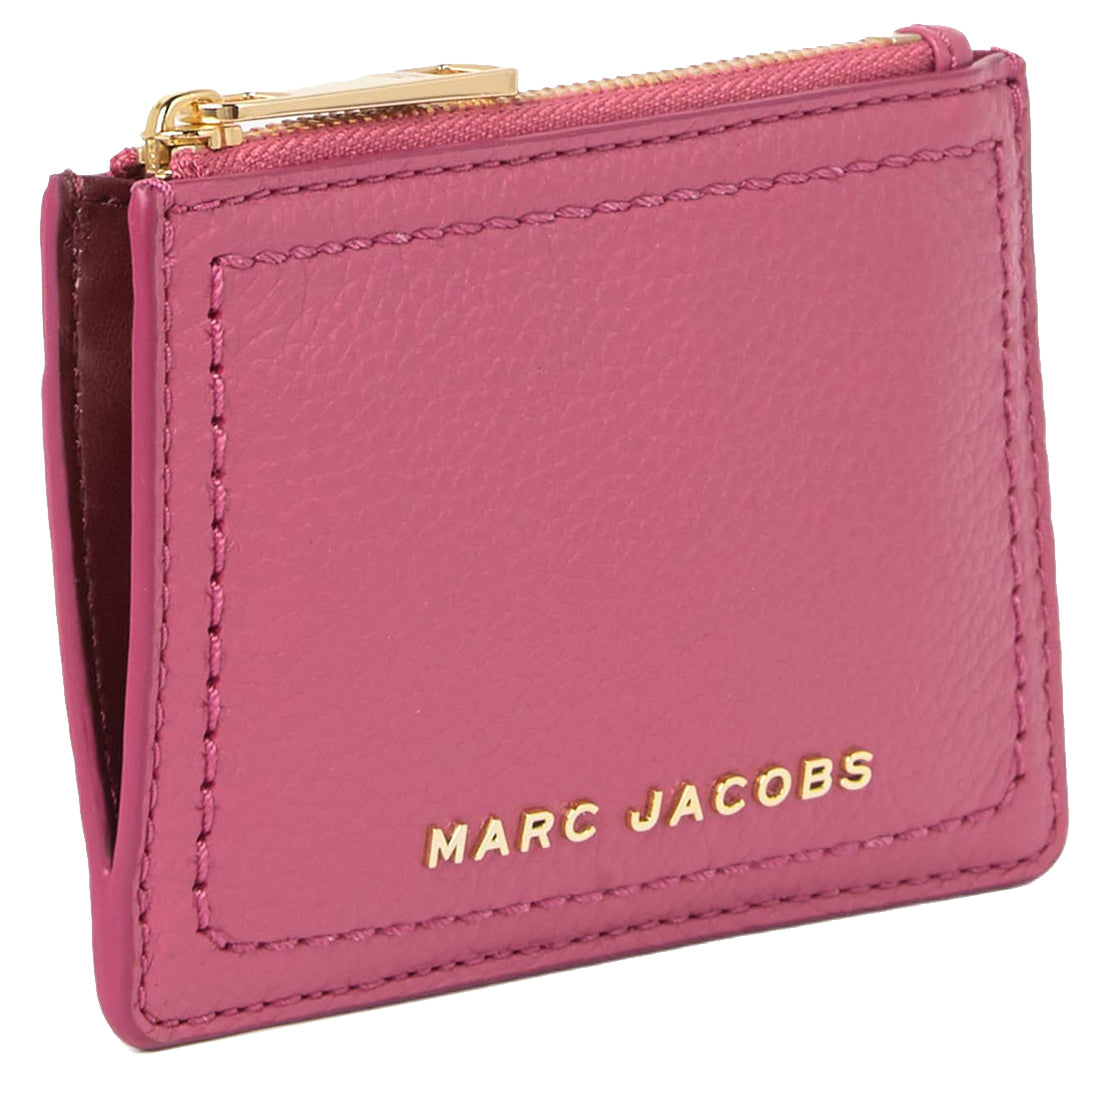 Marc Jacobs The Groove Zip Top Wallet in Bashful – PinkOrchard.com